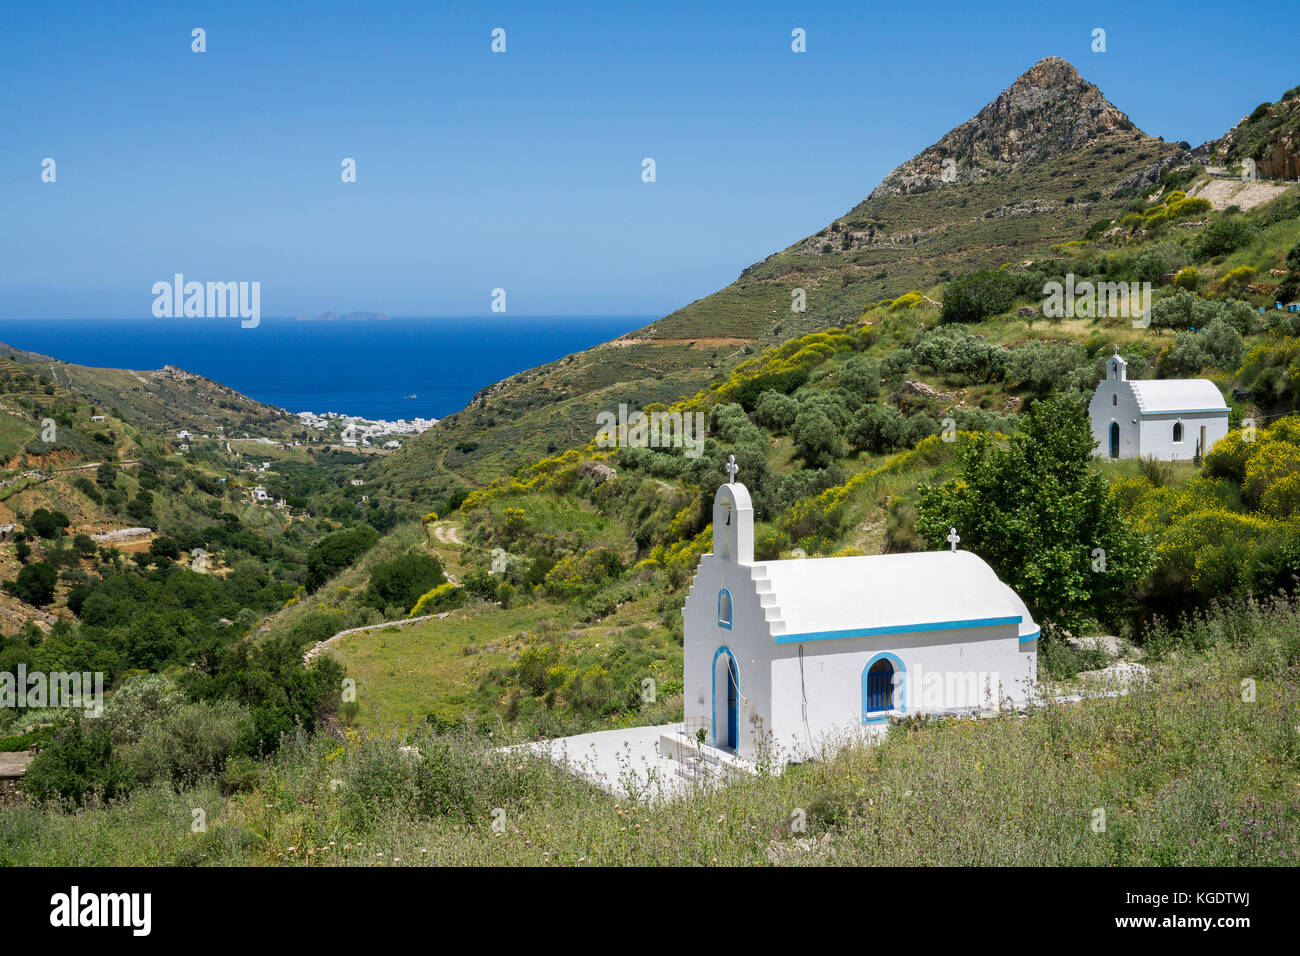 Two tiny chapels and coast landscape at the north side of Naxos, Cyclades, Greece, Mediterranean Sea, Europe Stock Photo